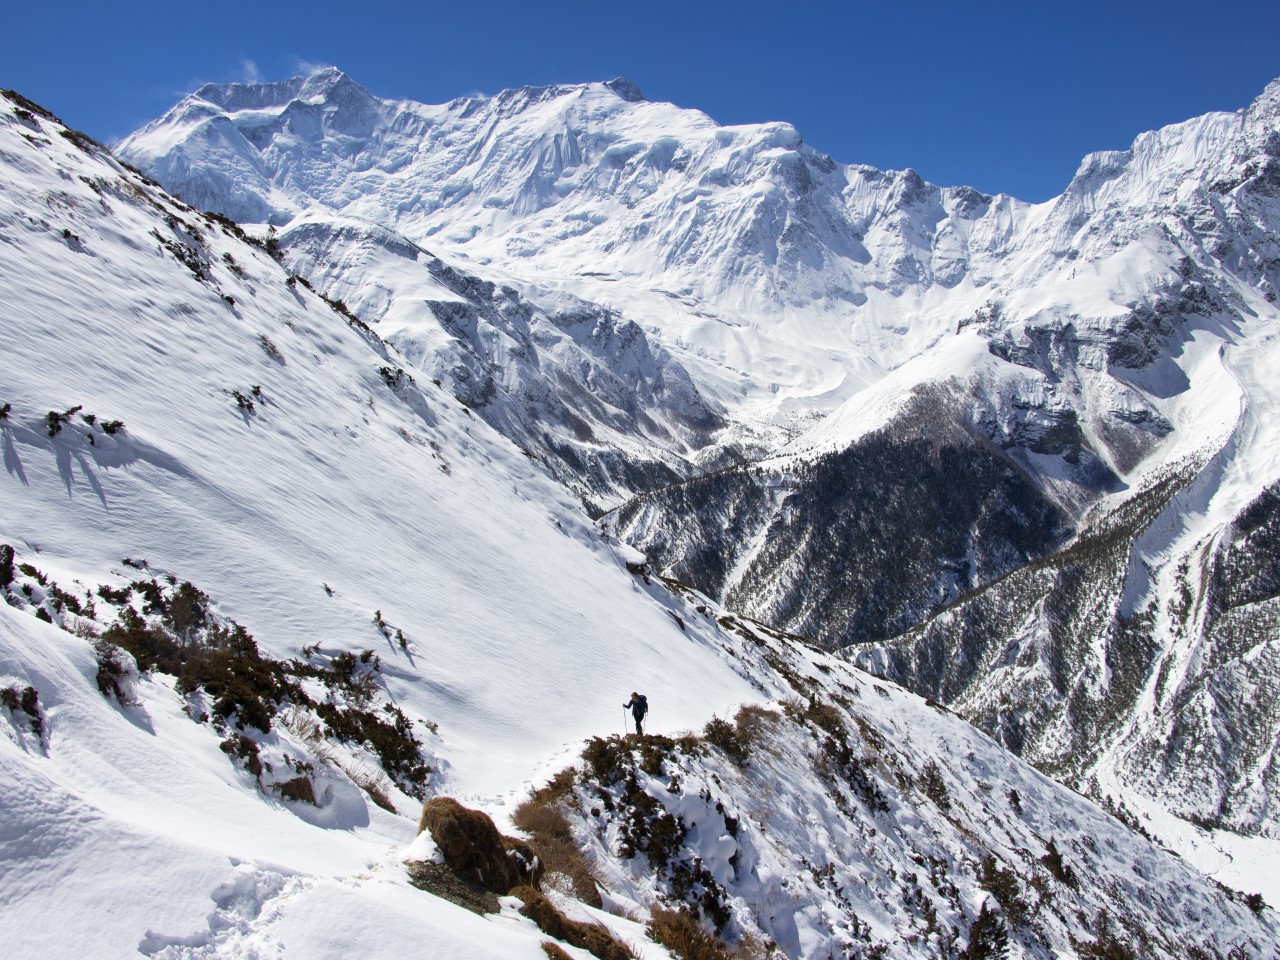 What to expect from the Annapurna Circuit trek